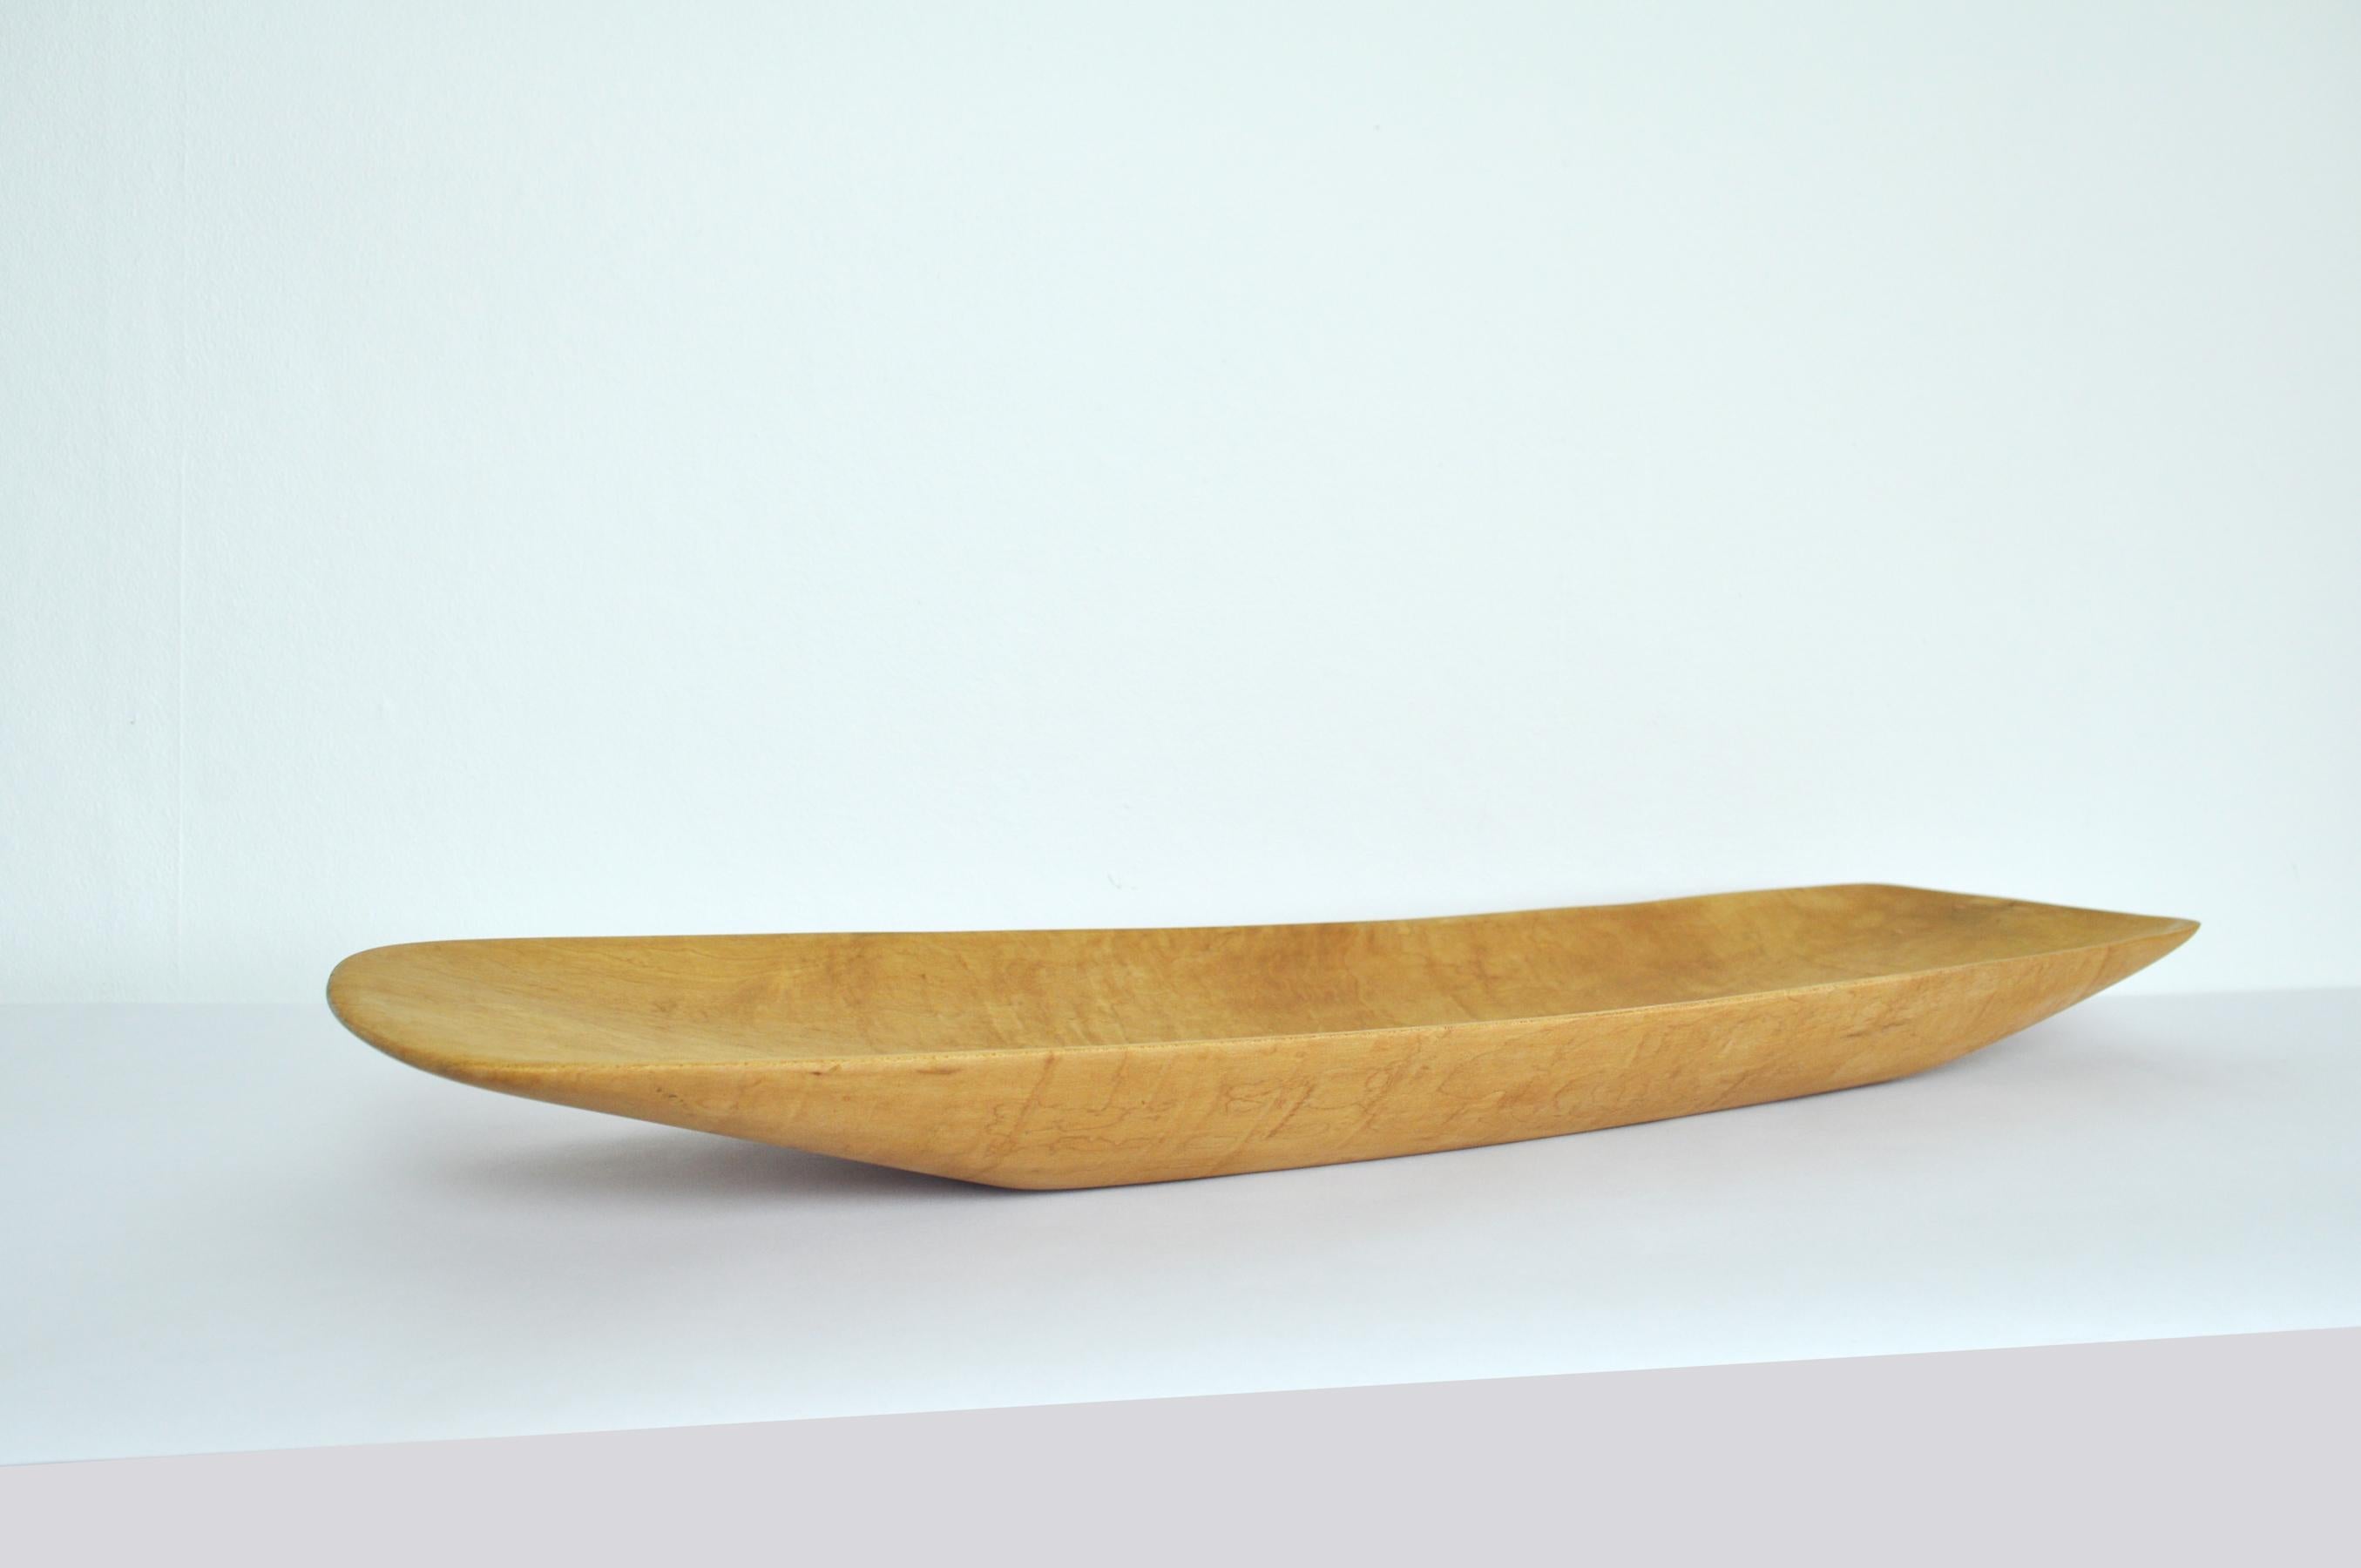 Handcrafted Danish Birch Dish with an Organic Design, 1960s For Sale 5